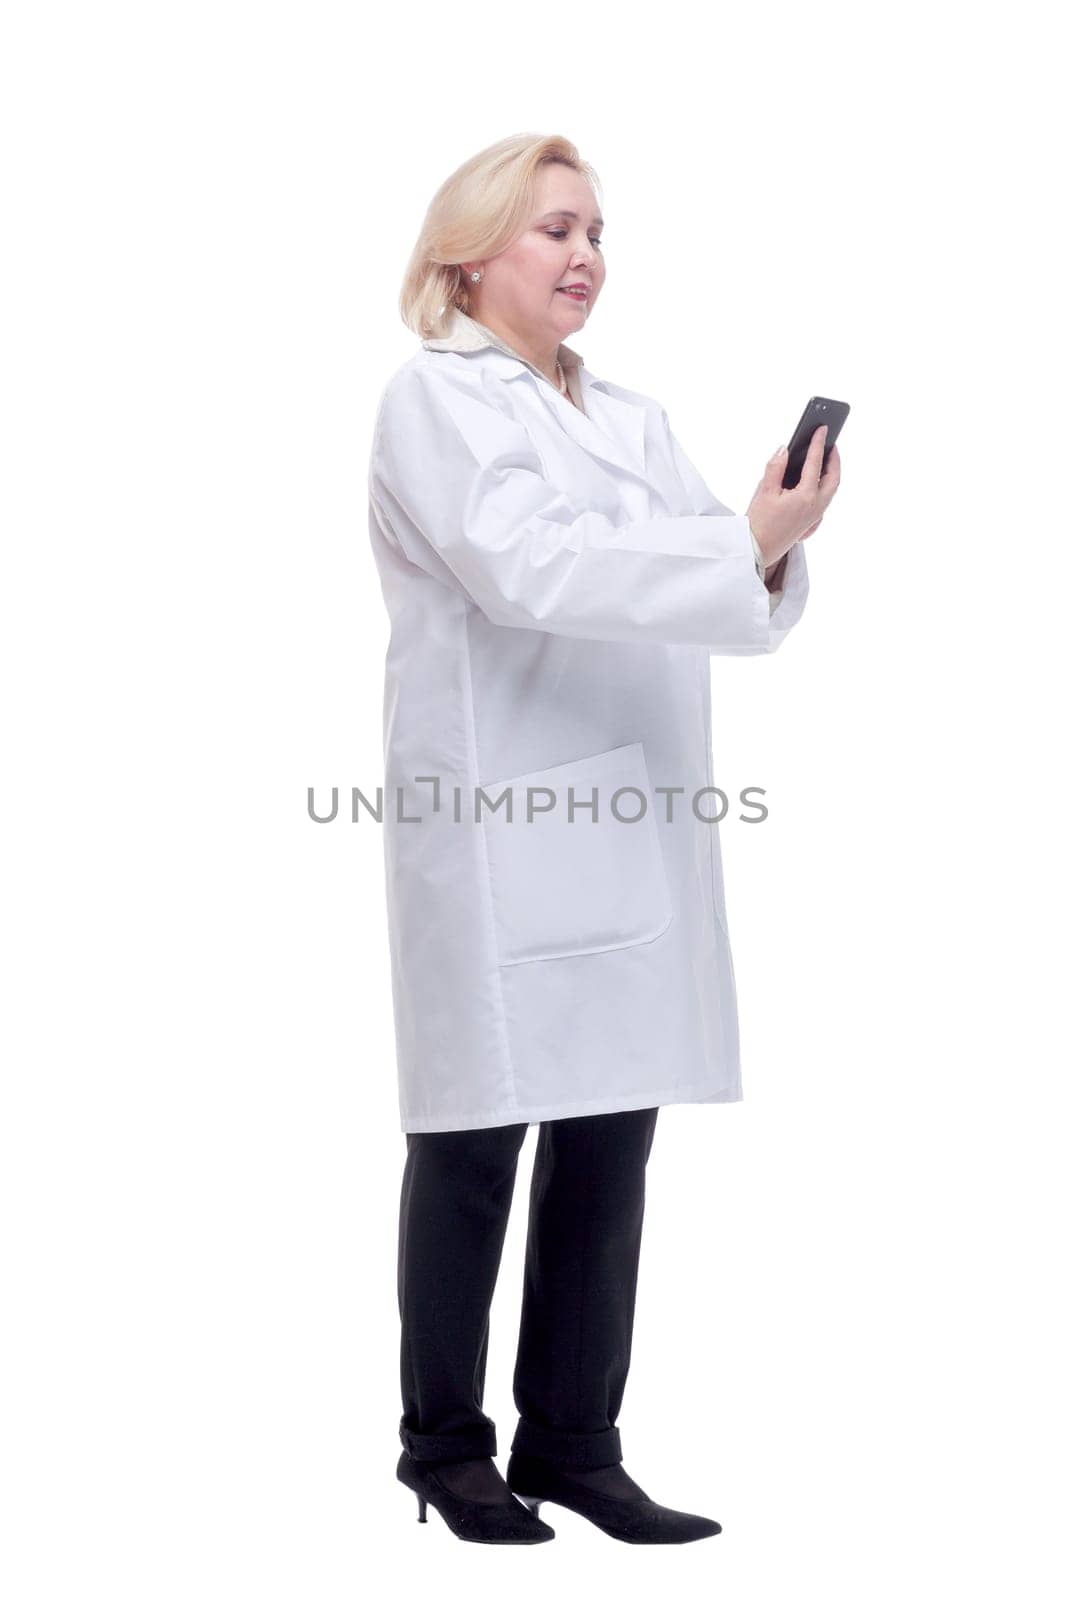 Cheerful young woman doctor standing and using smartphone by asdf